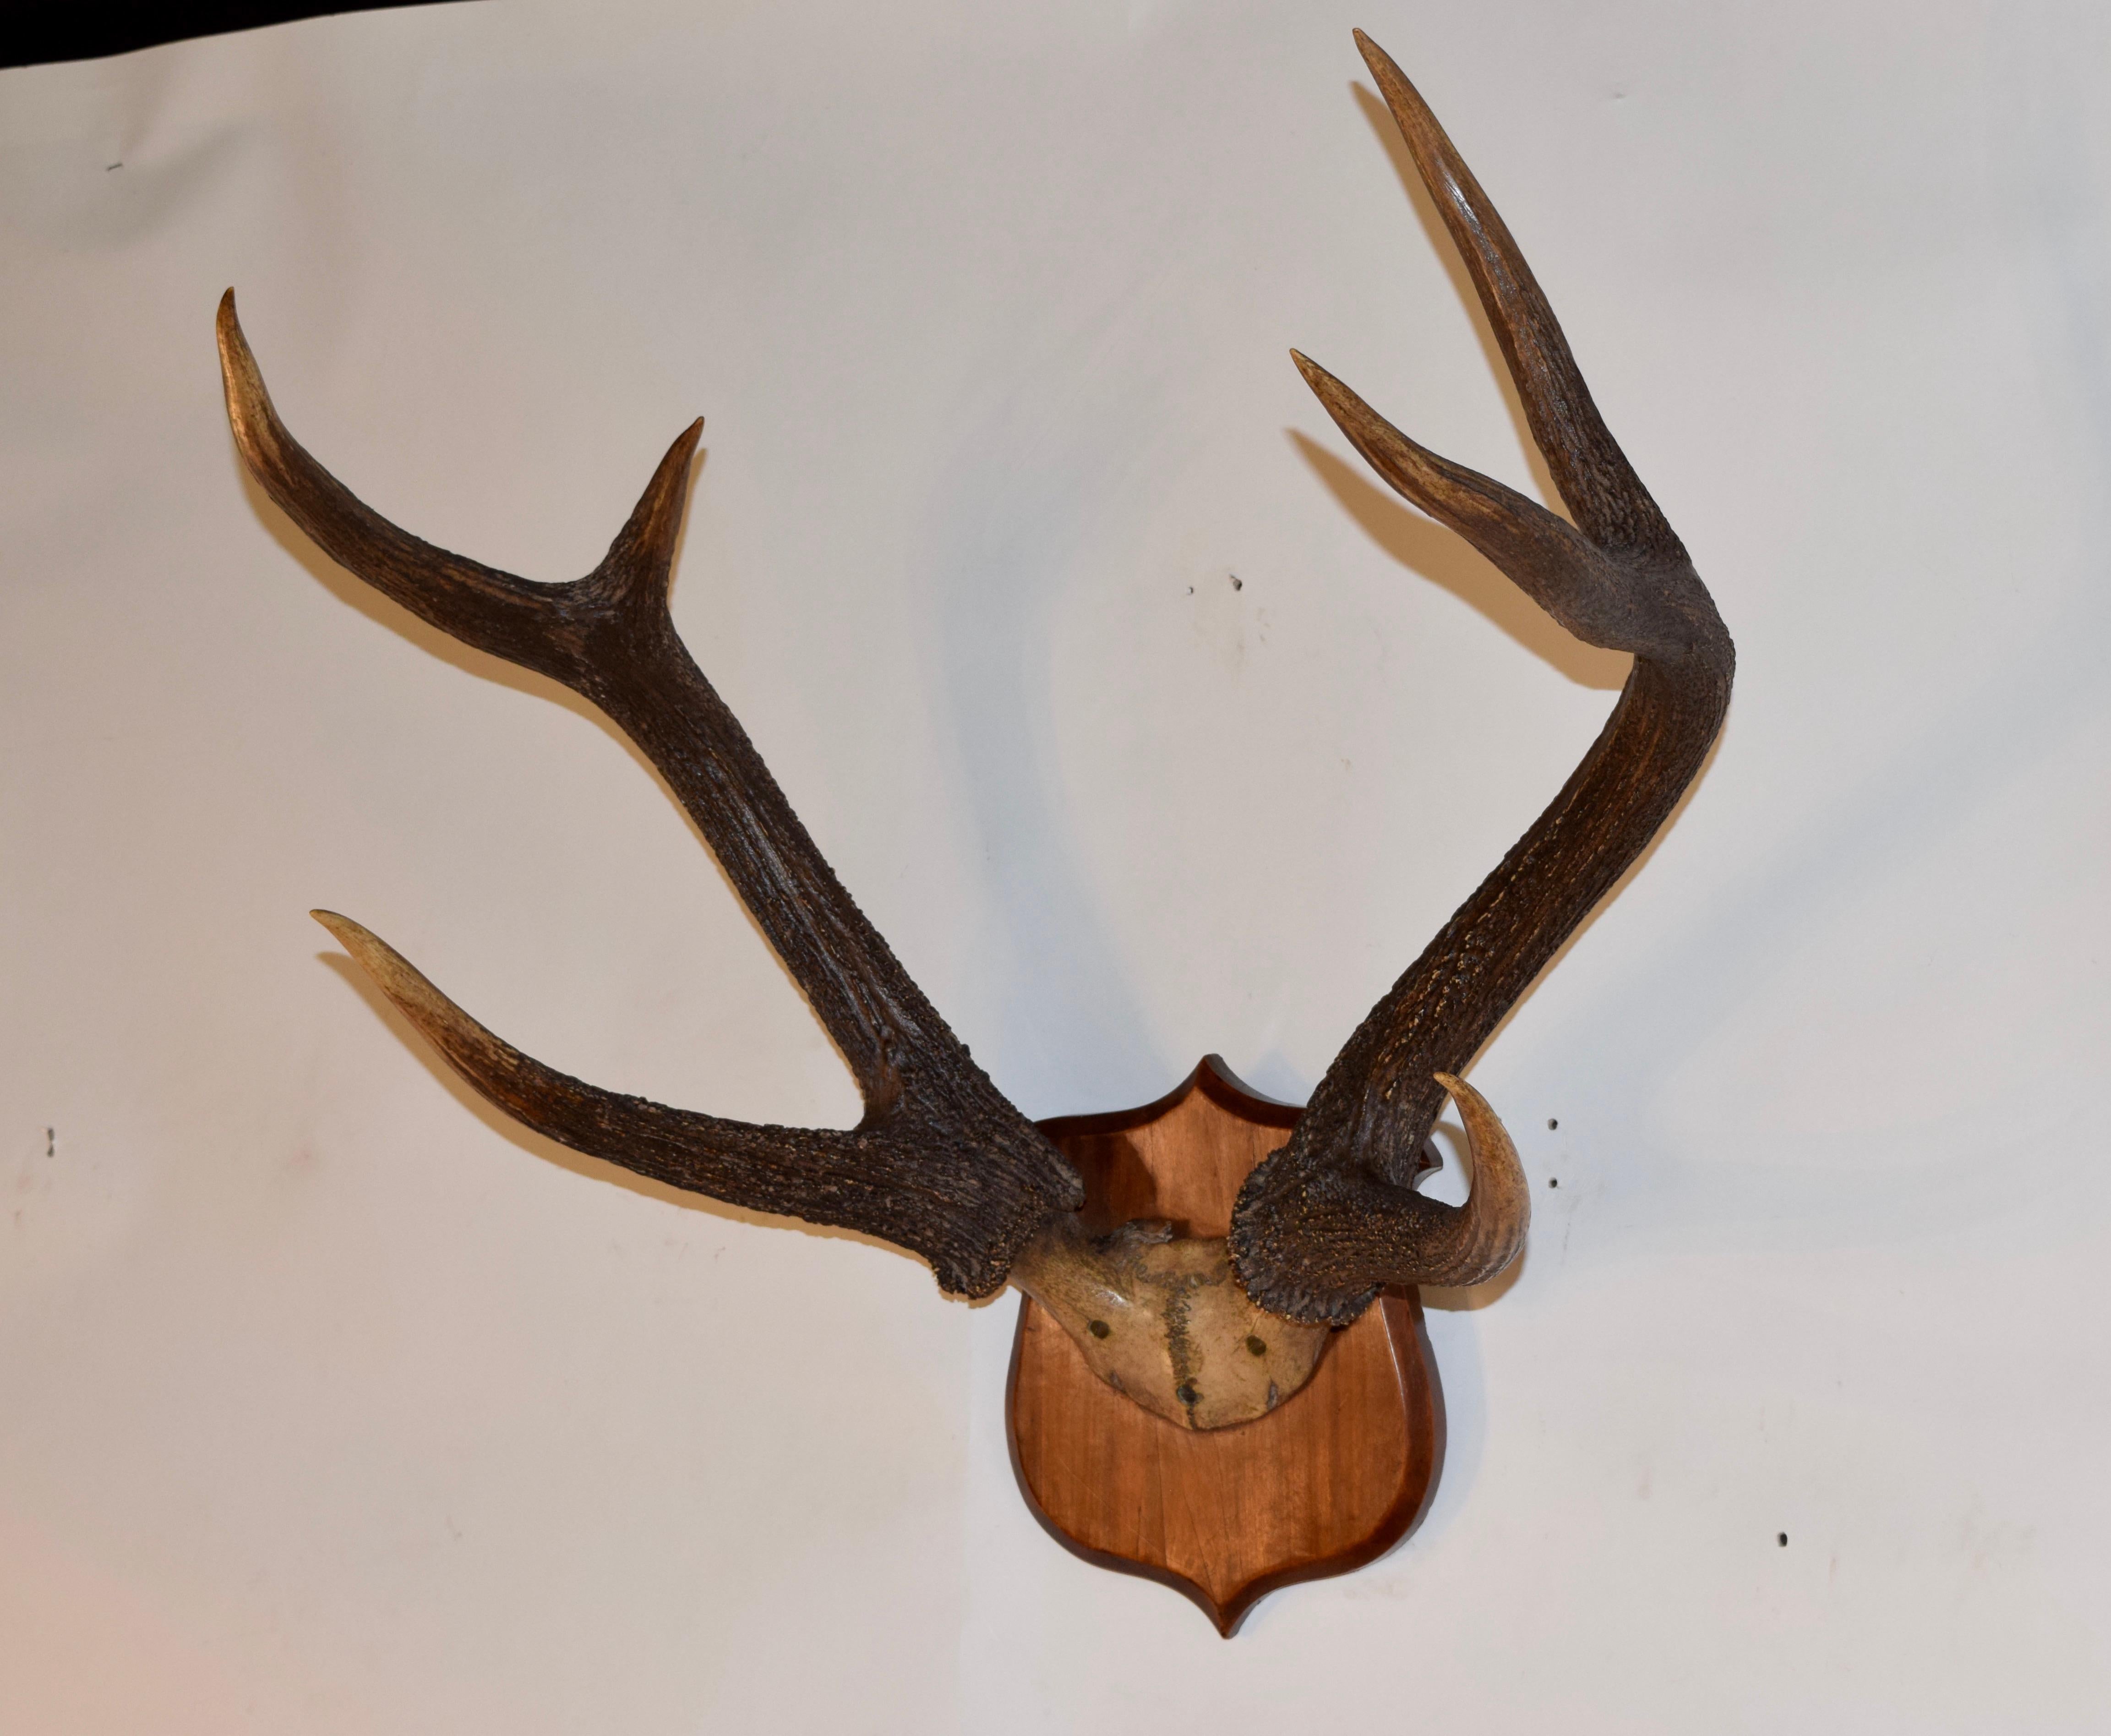 19th century American trophy plaque with a set of mule deer antlers. Affixed to hand shaped oak plaque.